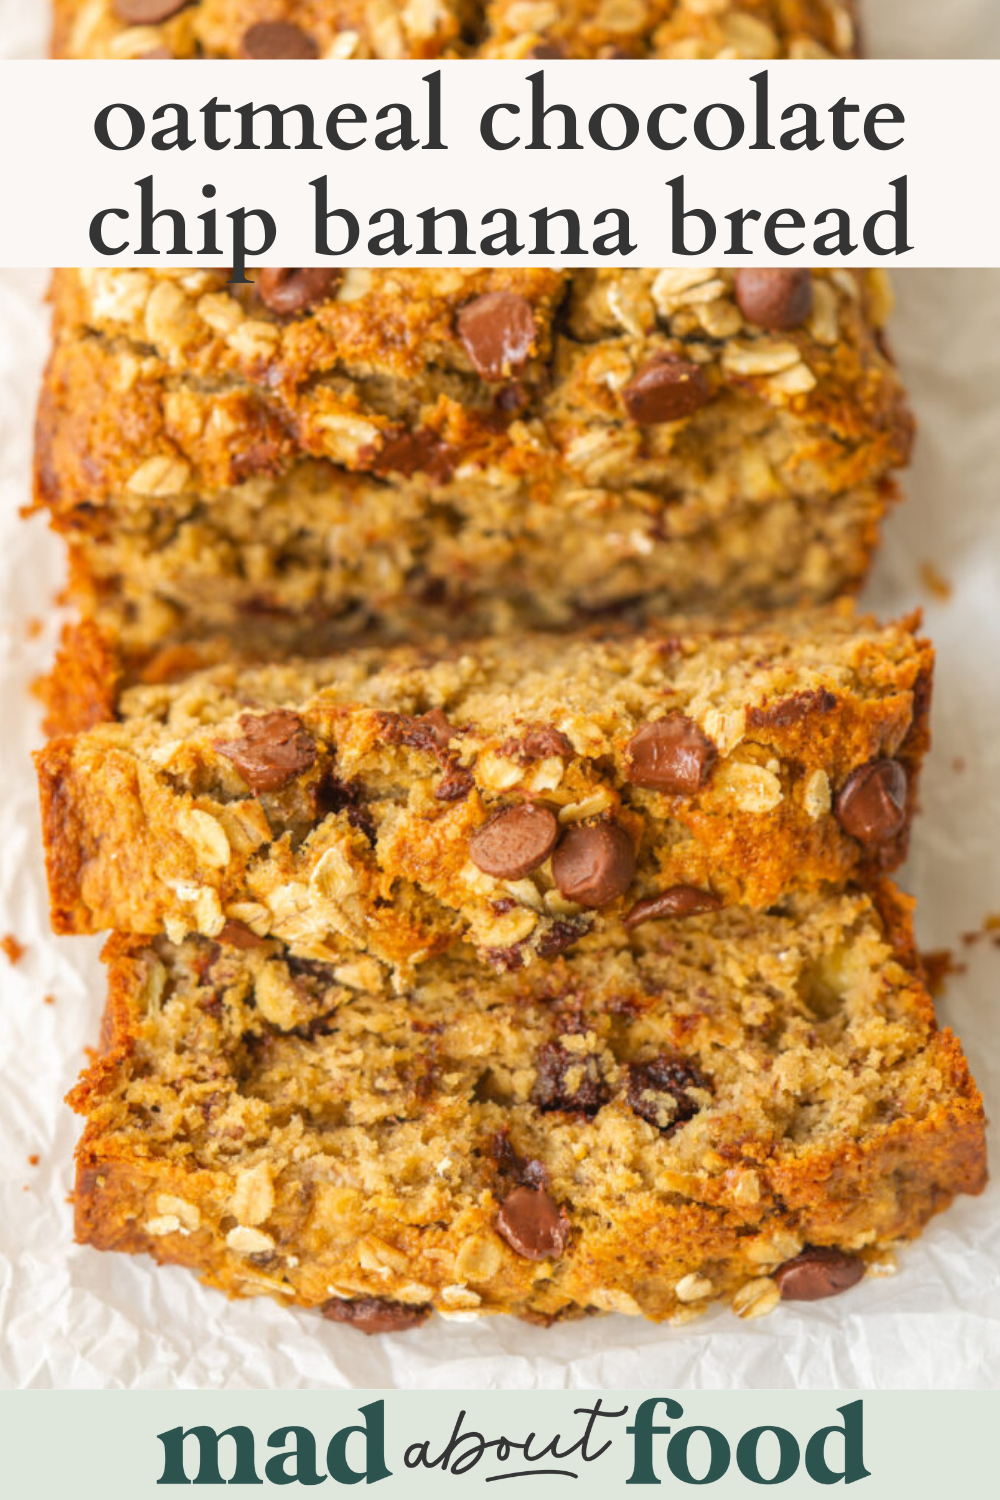 Image for pinning Oatmeal Chocolate Chip Banana Bread recipe on Pinterest